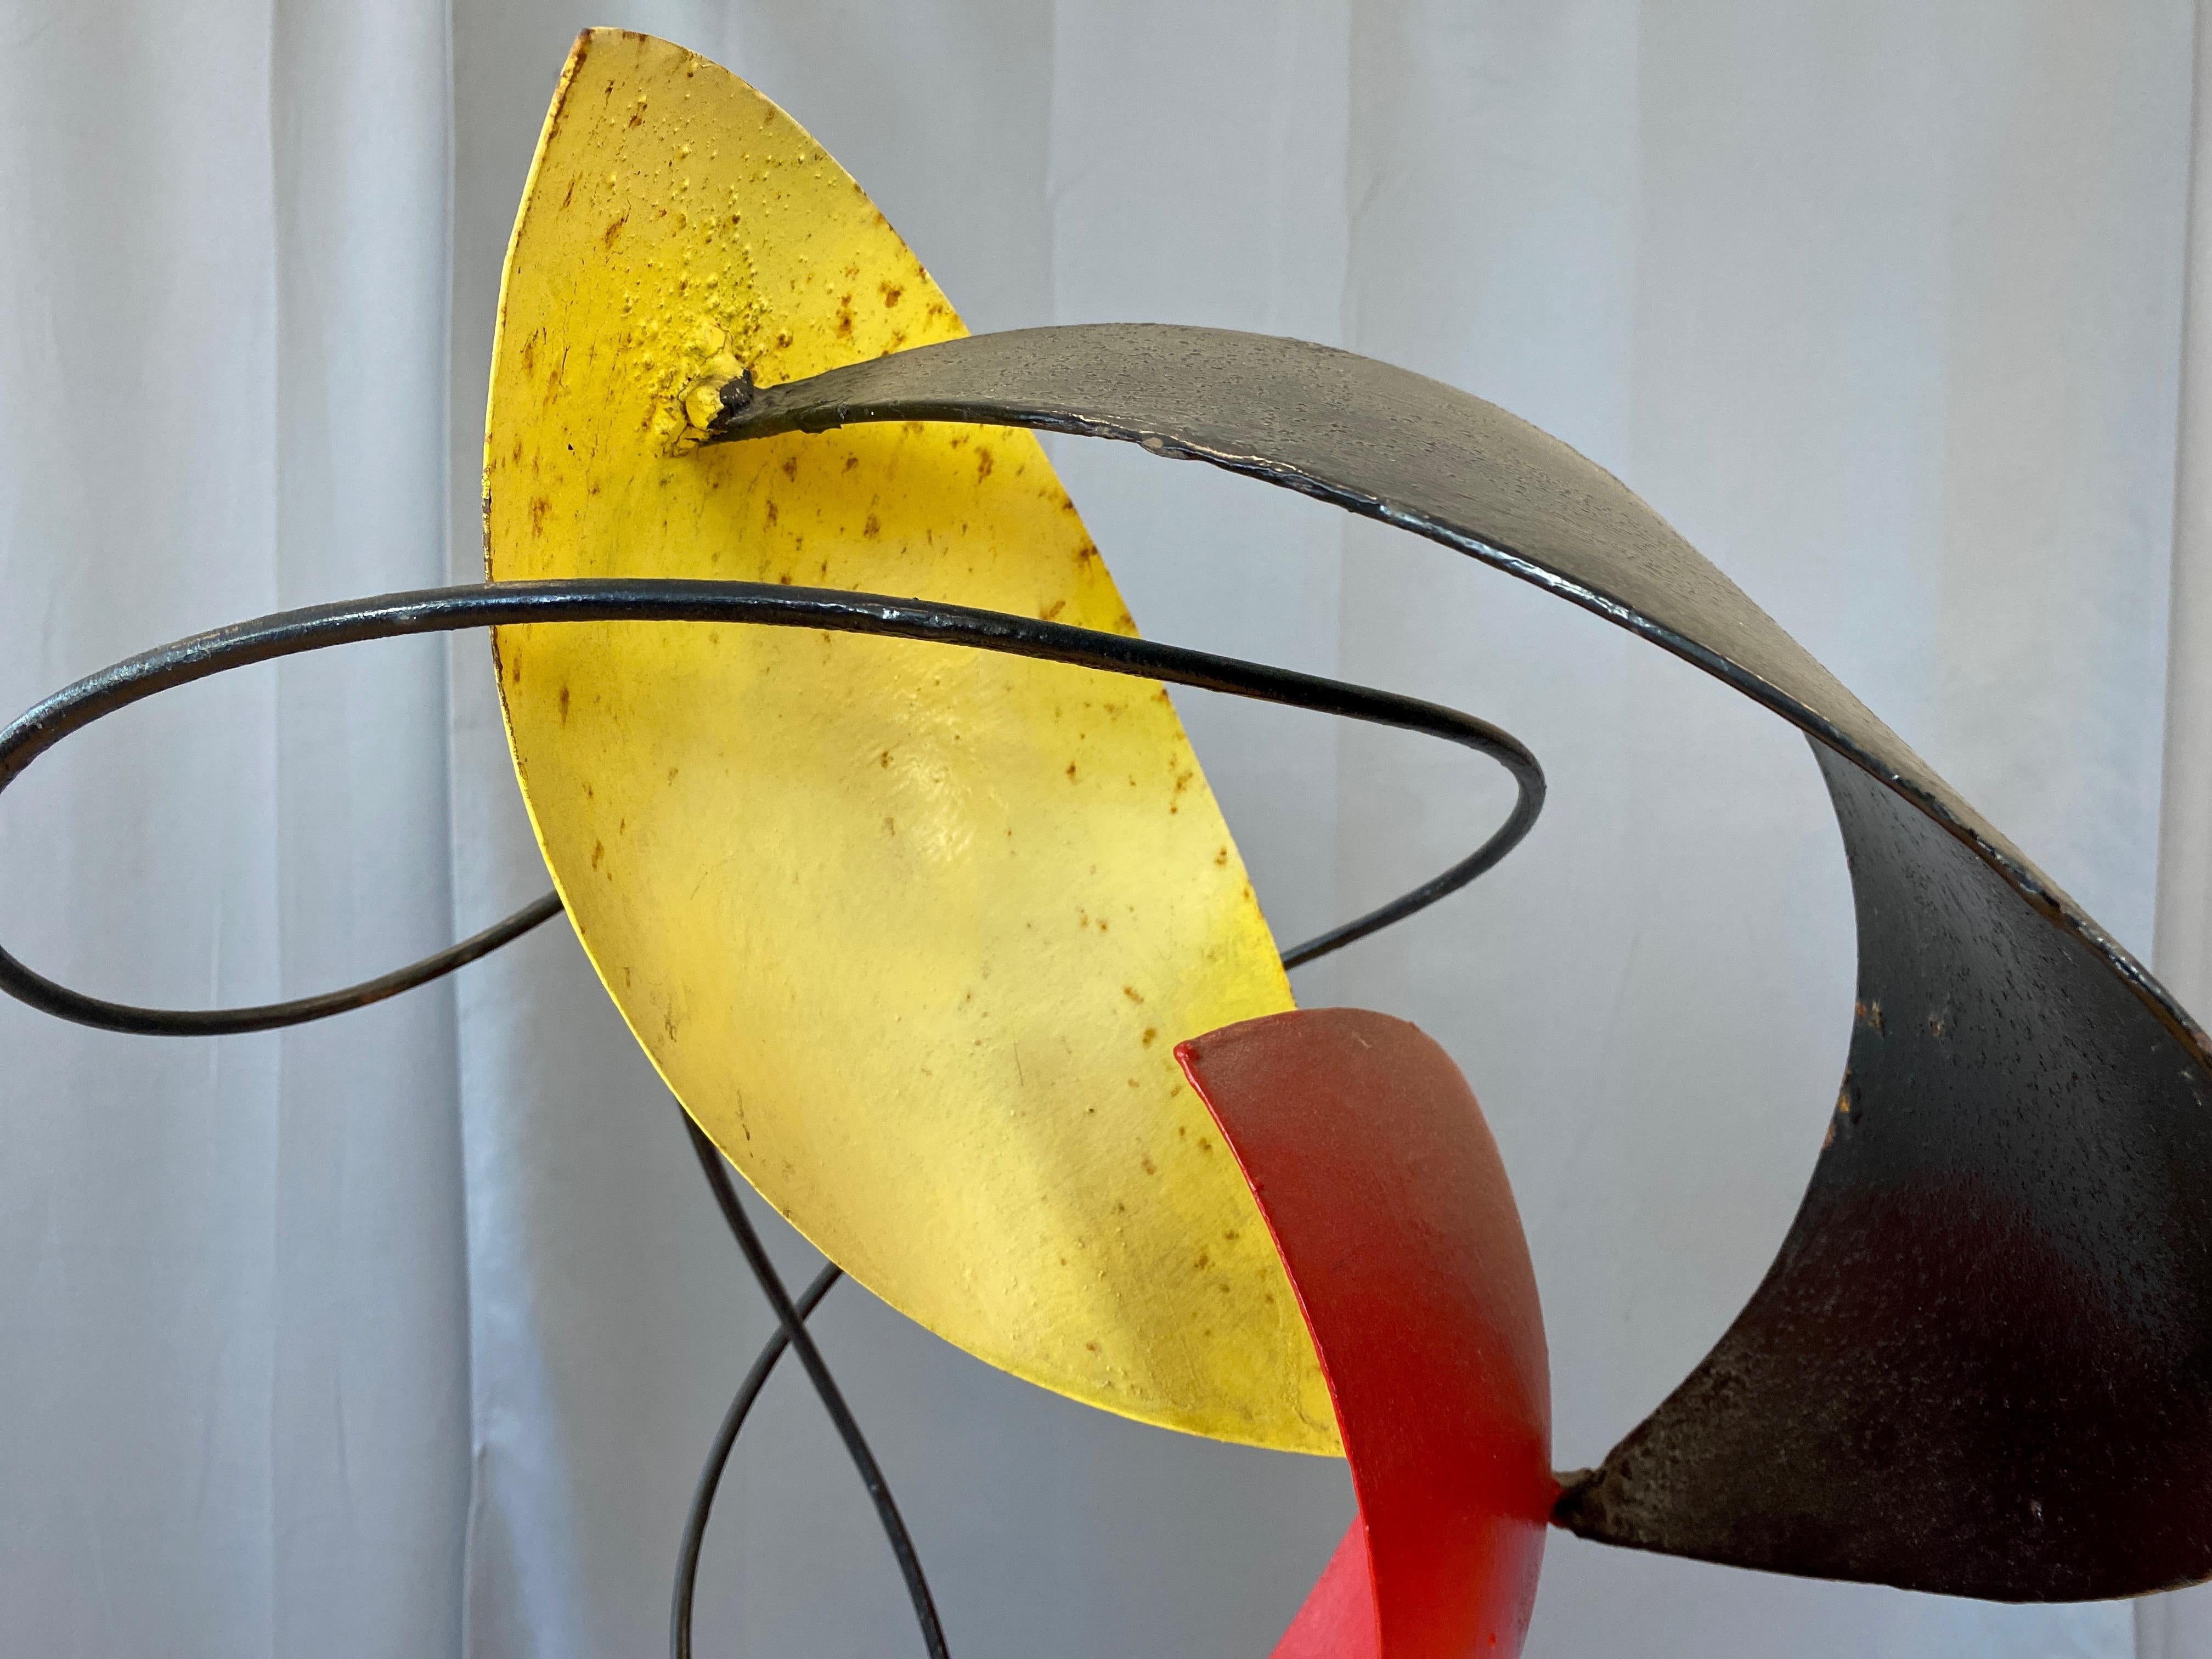 Béla Harcos Tall Abstract Expressionist Enameled Steel Sculpture, Late 1990s For Sale 2